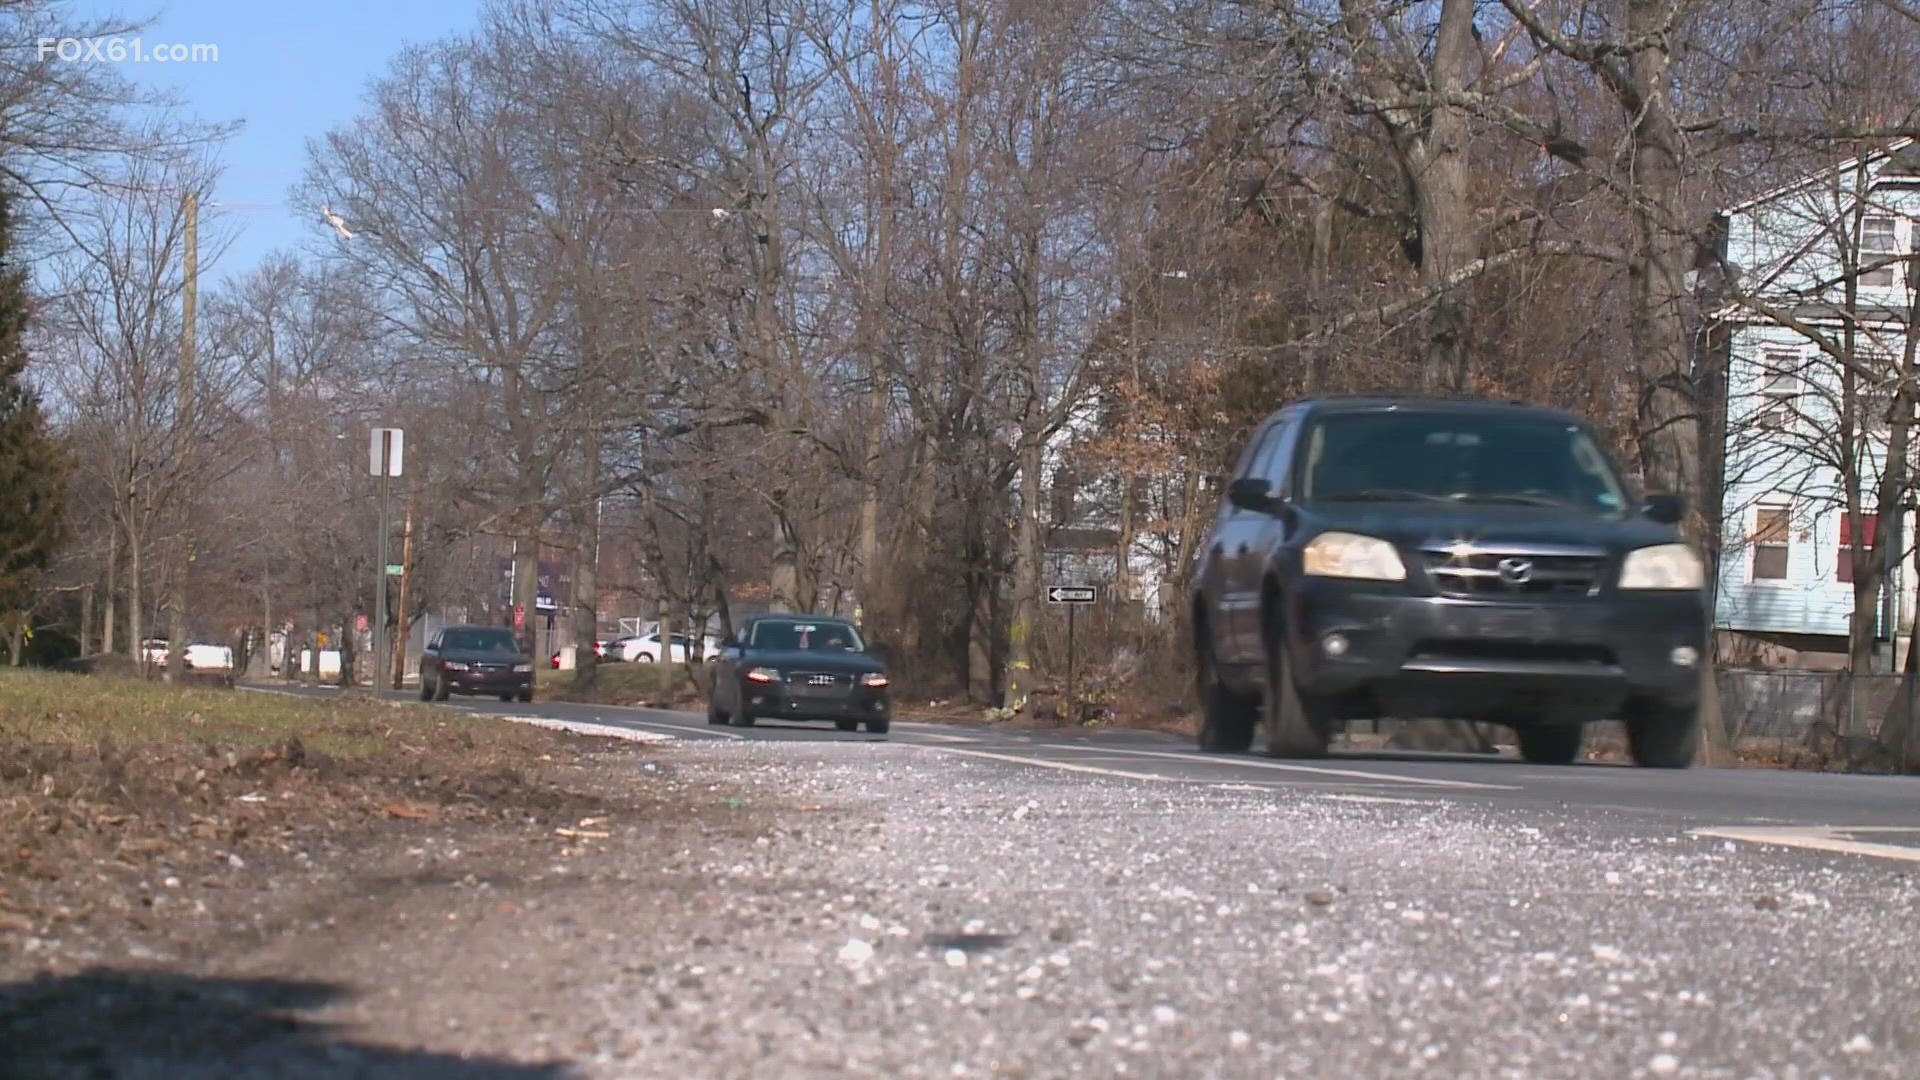 Sherman Parkway is the area officials say needs to be reformed to make safer for drivers and pedestrians.